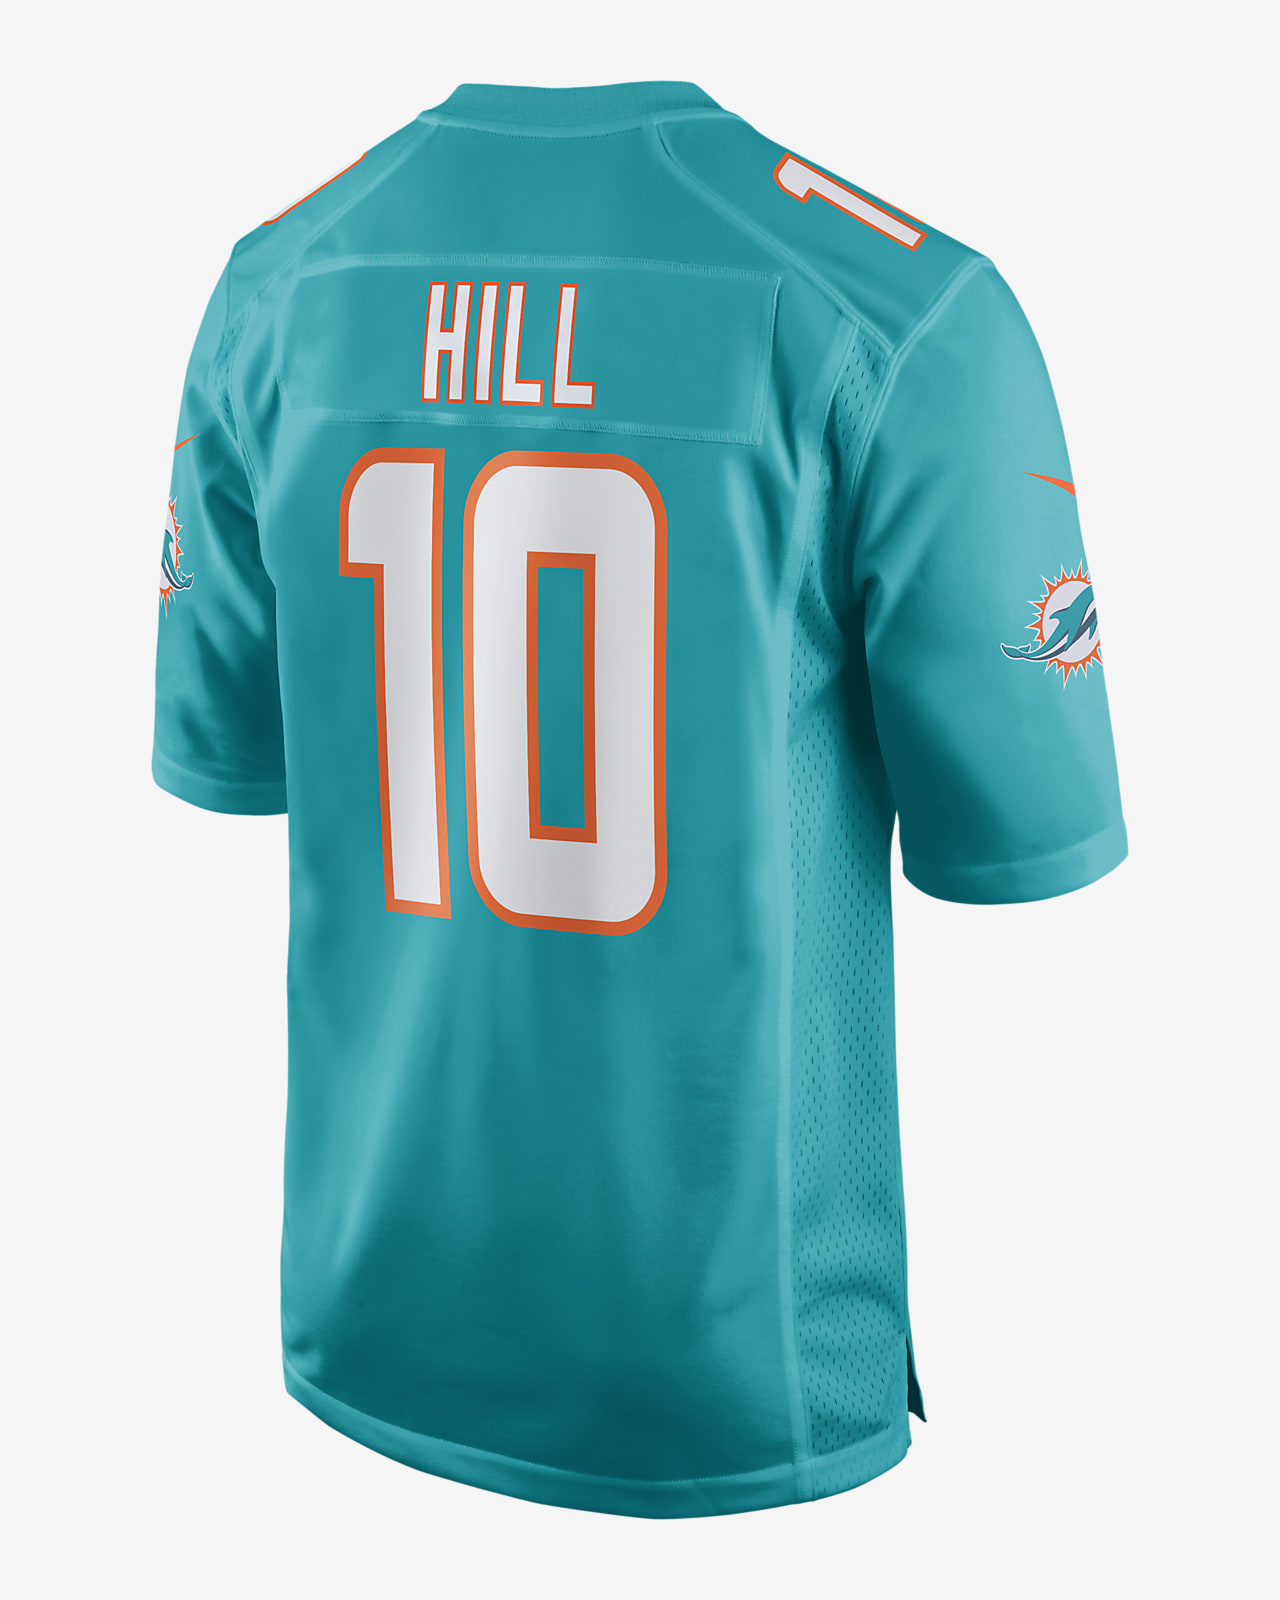 NFL Miami Dolphins (Tyreek Hill) Men's Game Football Jersey.